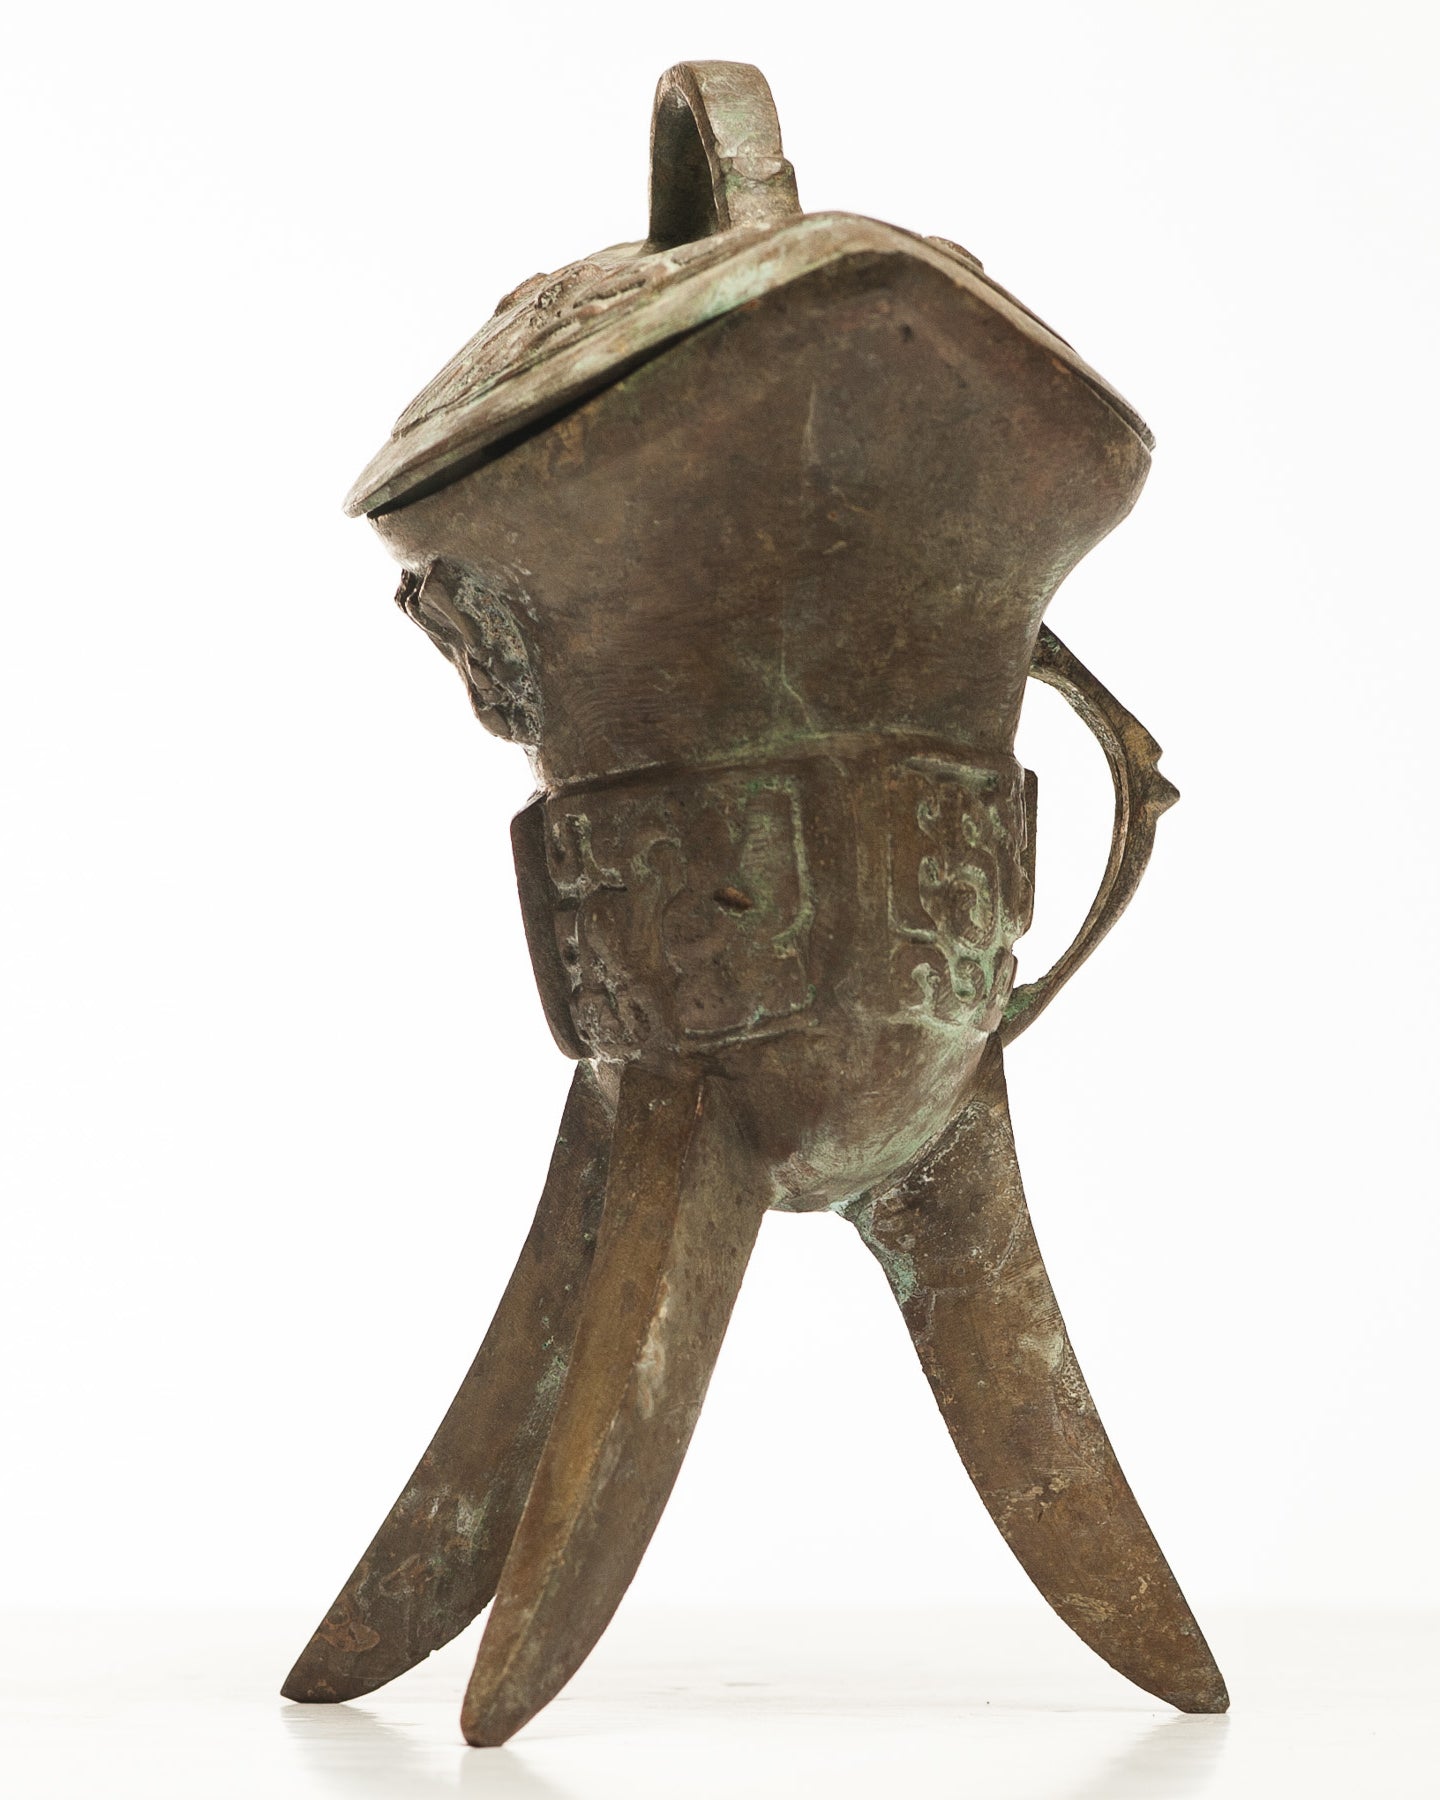 Patinated Wine Vessel with Lid